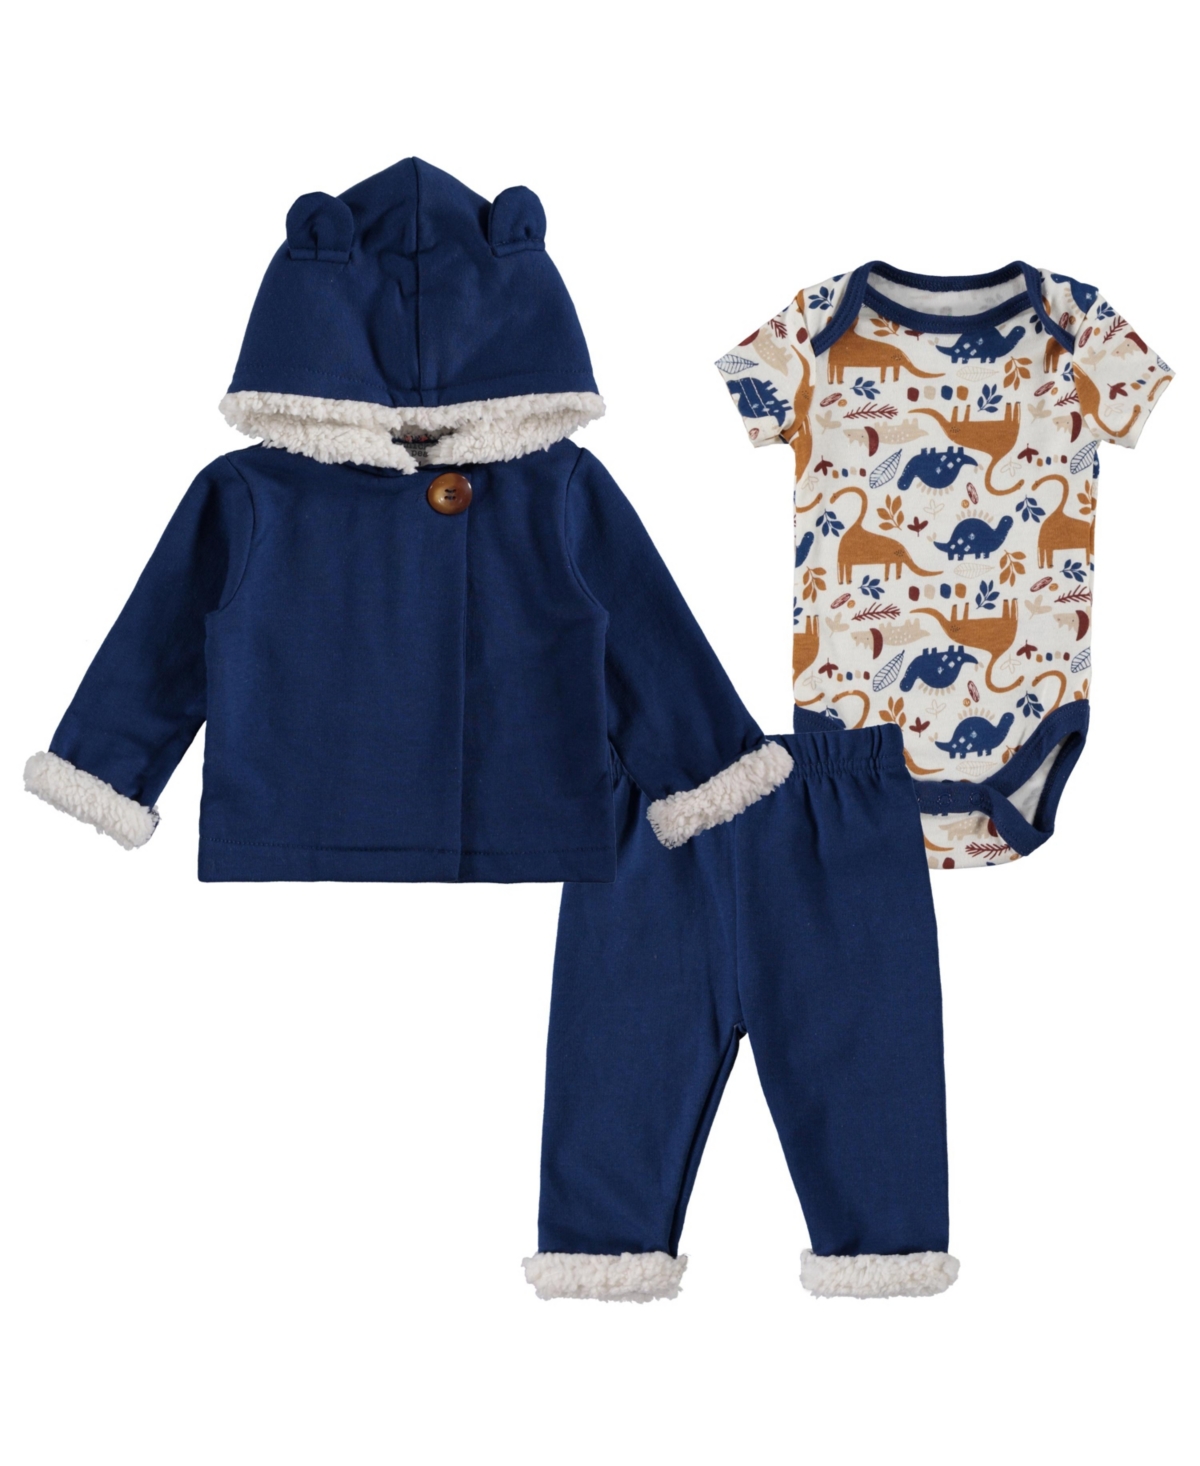 Chickpea Baby Boys Bodysuit, Sherpa-lined Jacket And Pant, 3 Piece Set In Navy